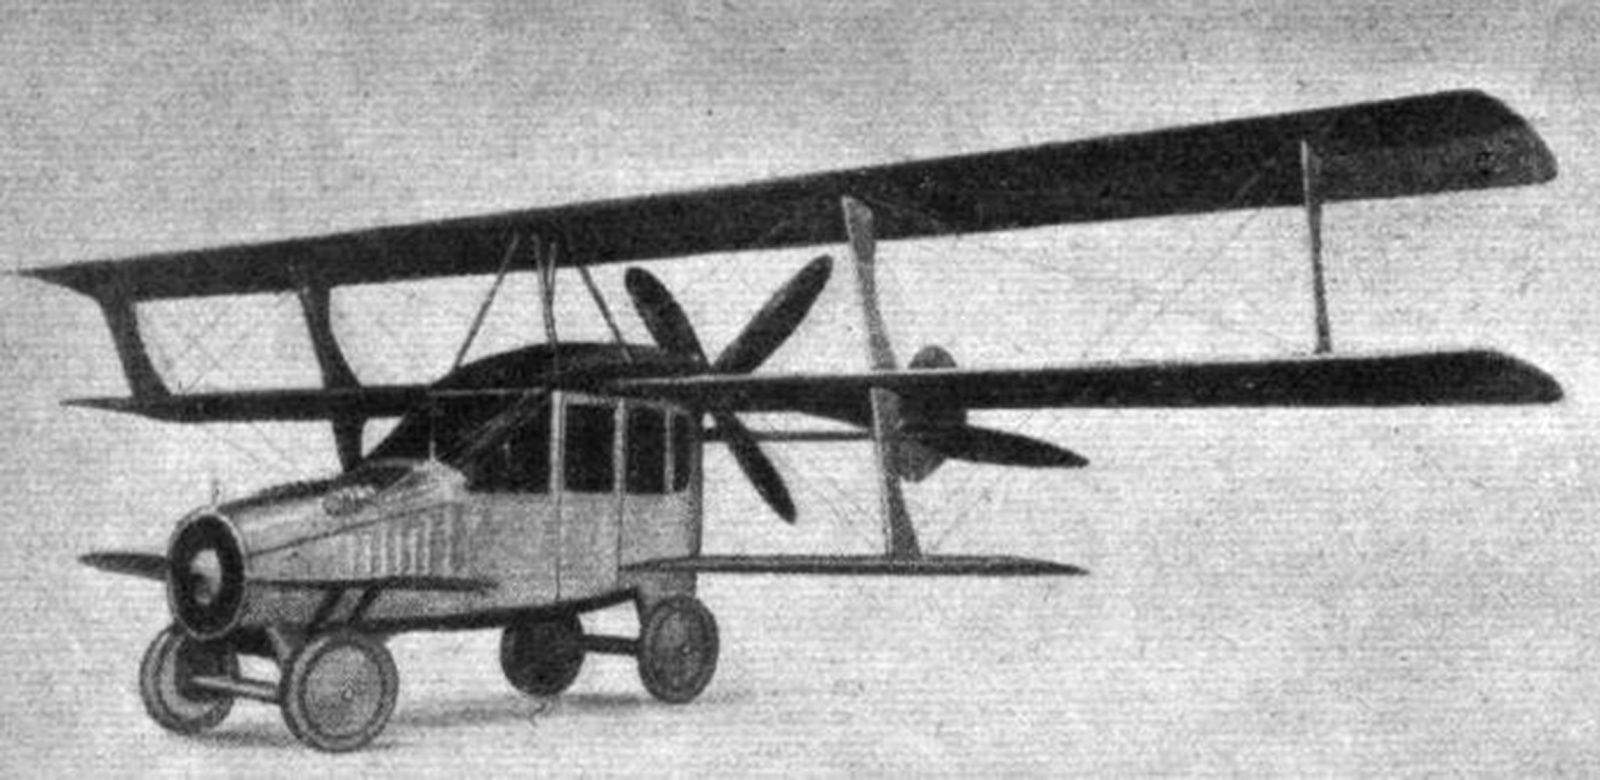 The Curtiss Autoplane in 1917 is considered the first flying car. It hopped but never got far off the ground.